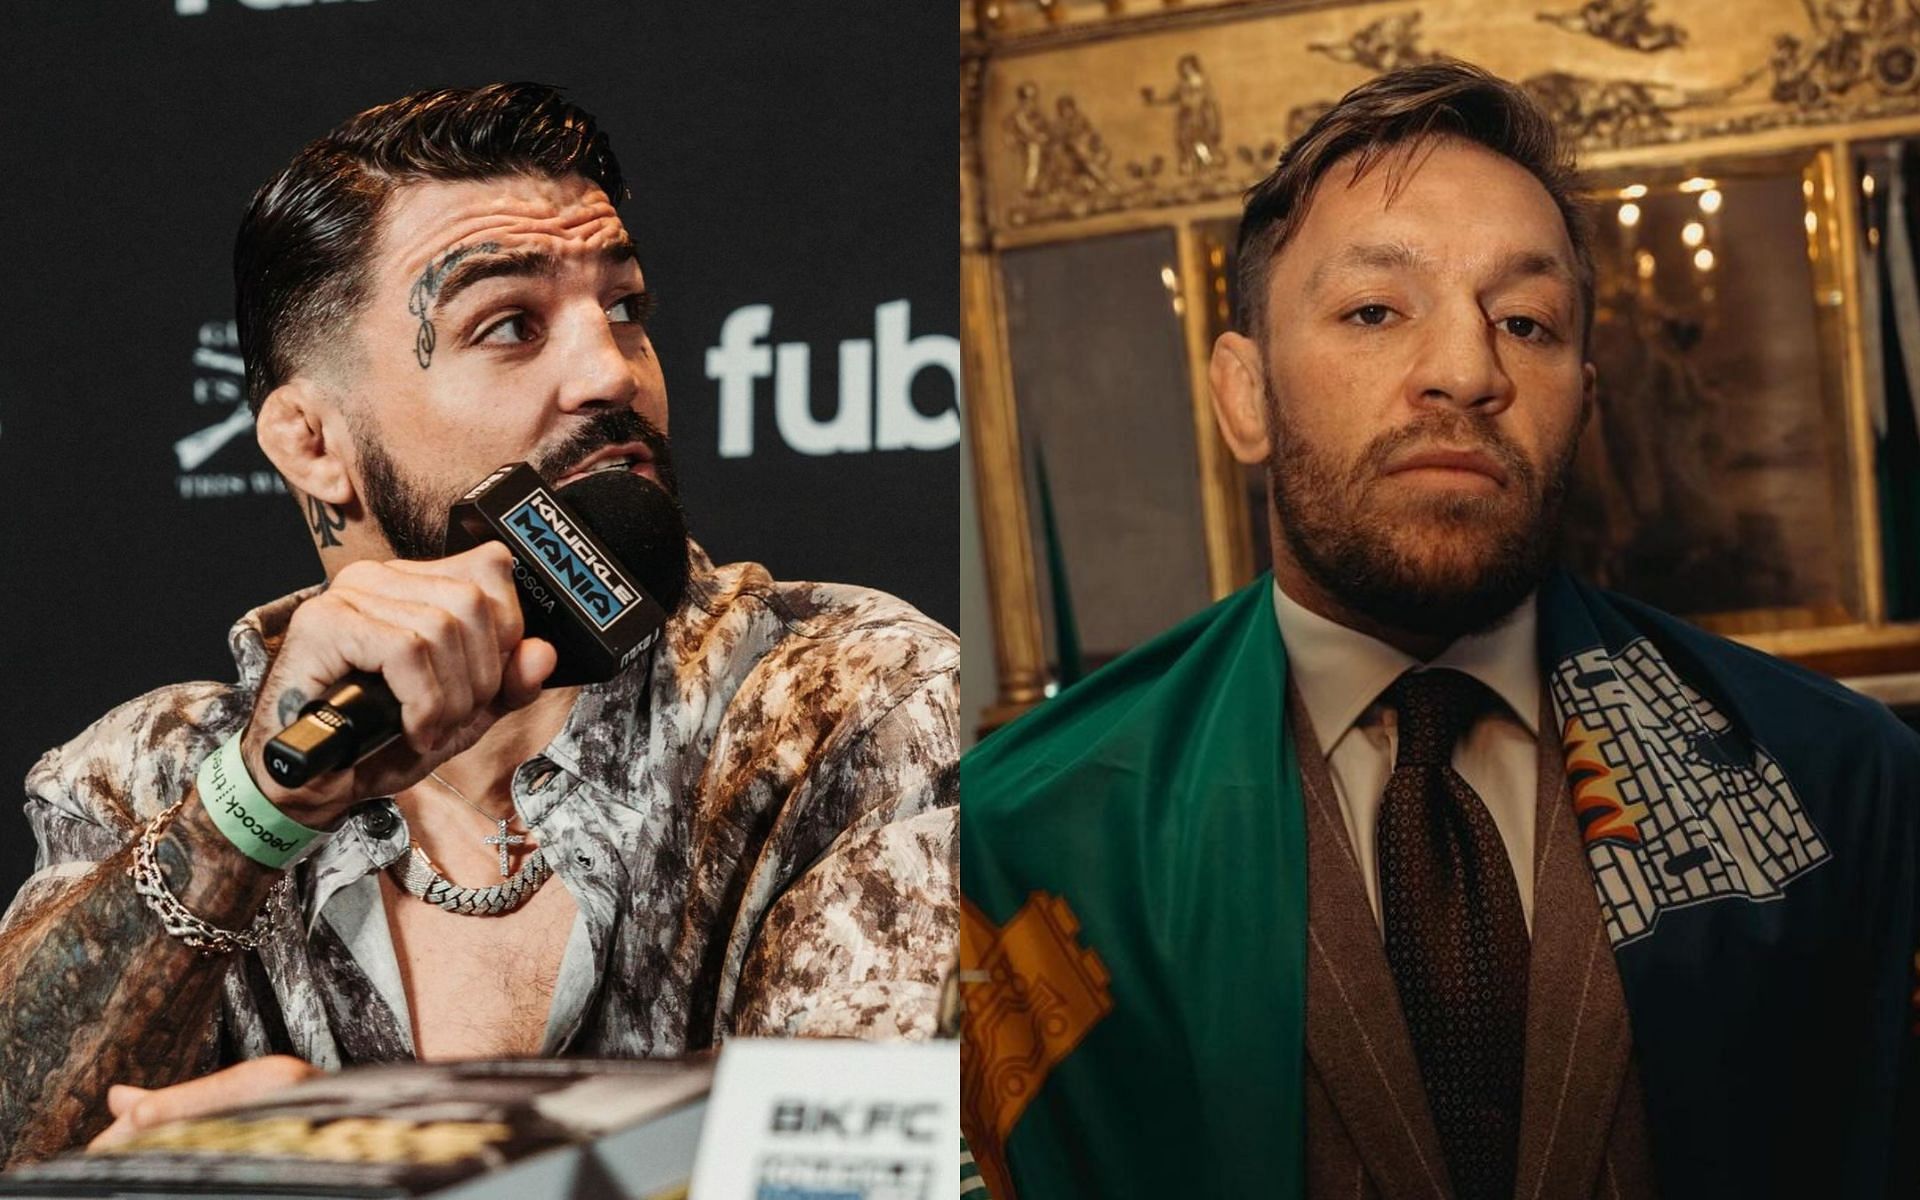 Mike Perry (left) and Conor McGregor (right) are both known for their fearsome KO power [Images courtesy: @platinummikeperry and @thenotoriousmma on Instagram]